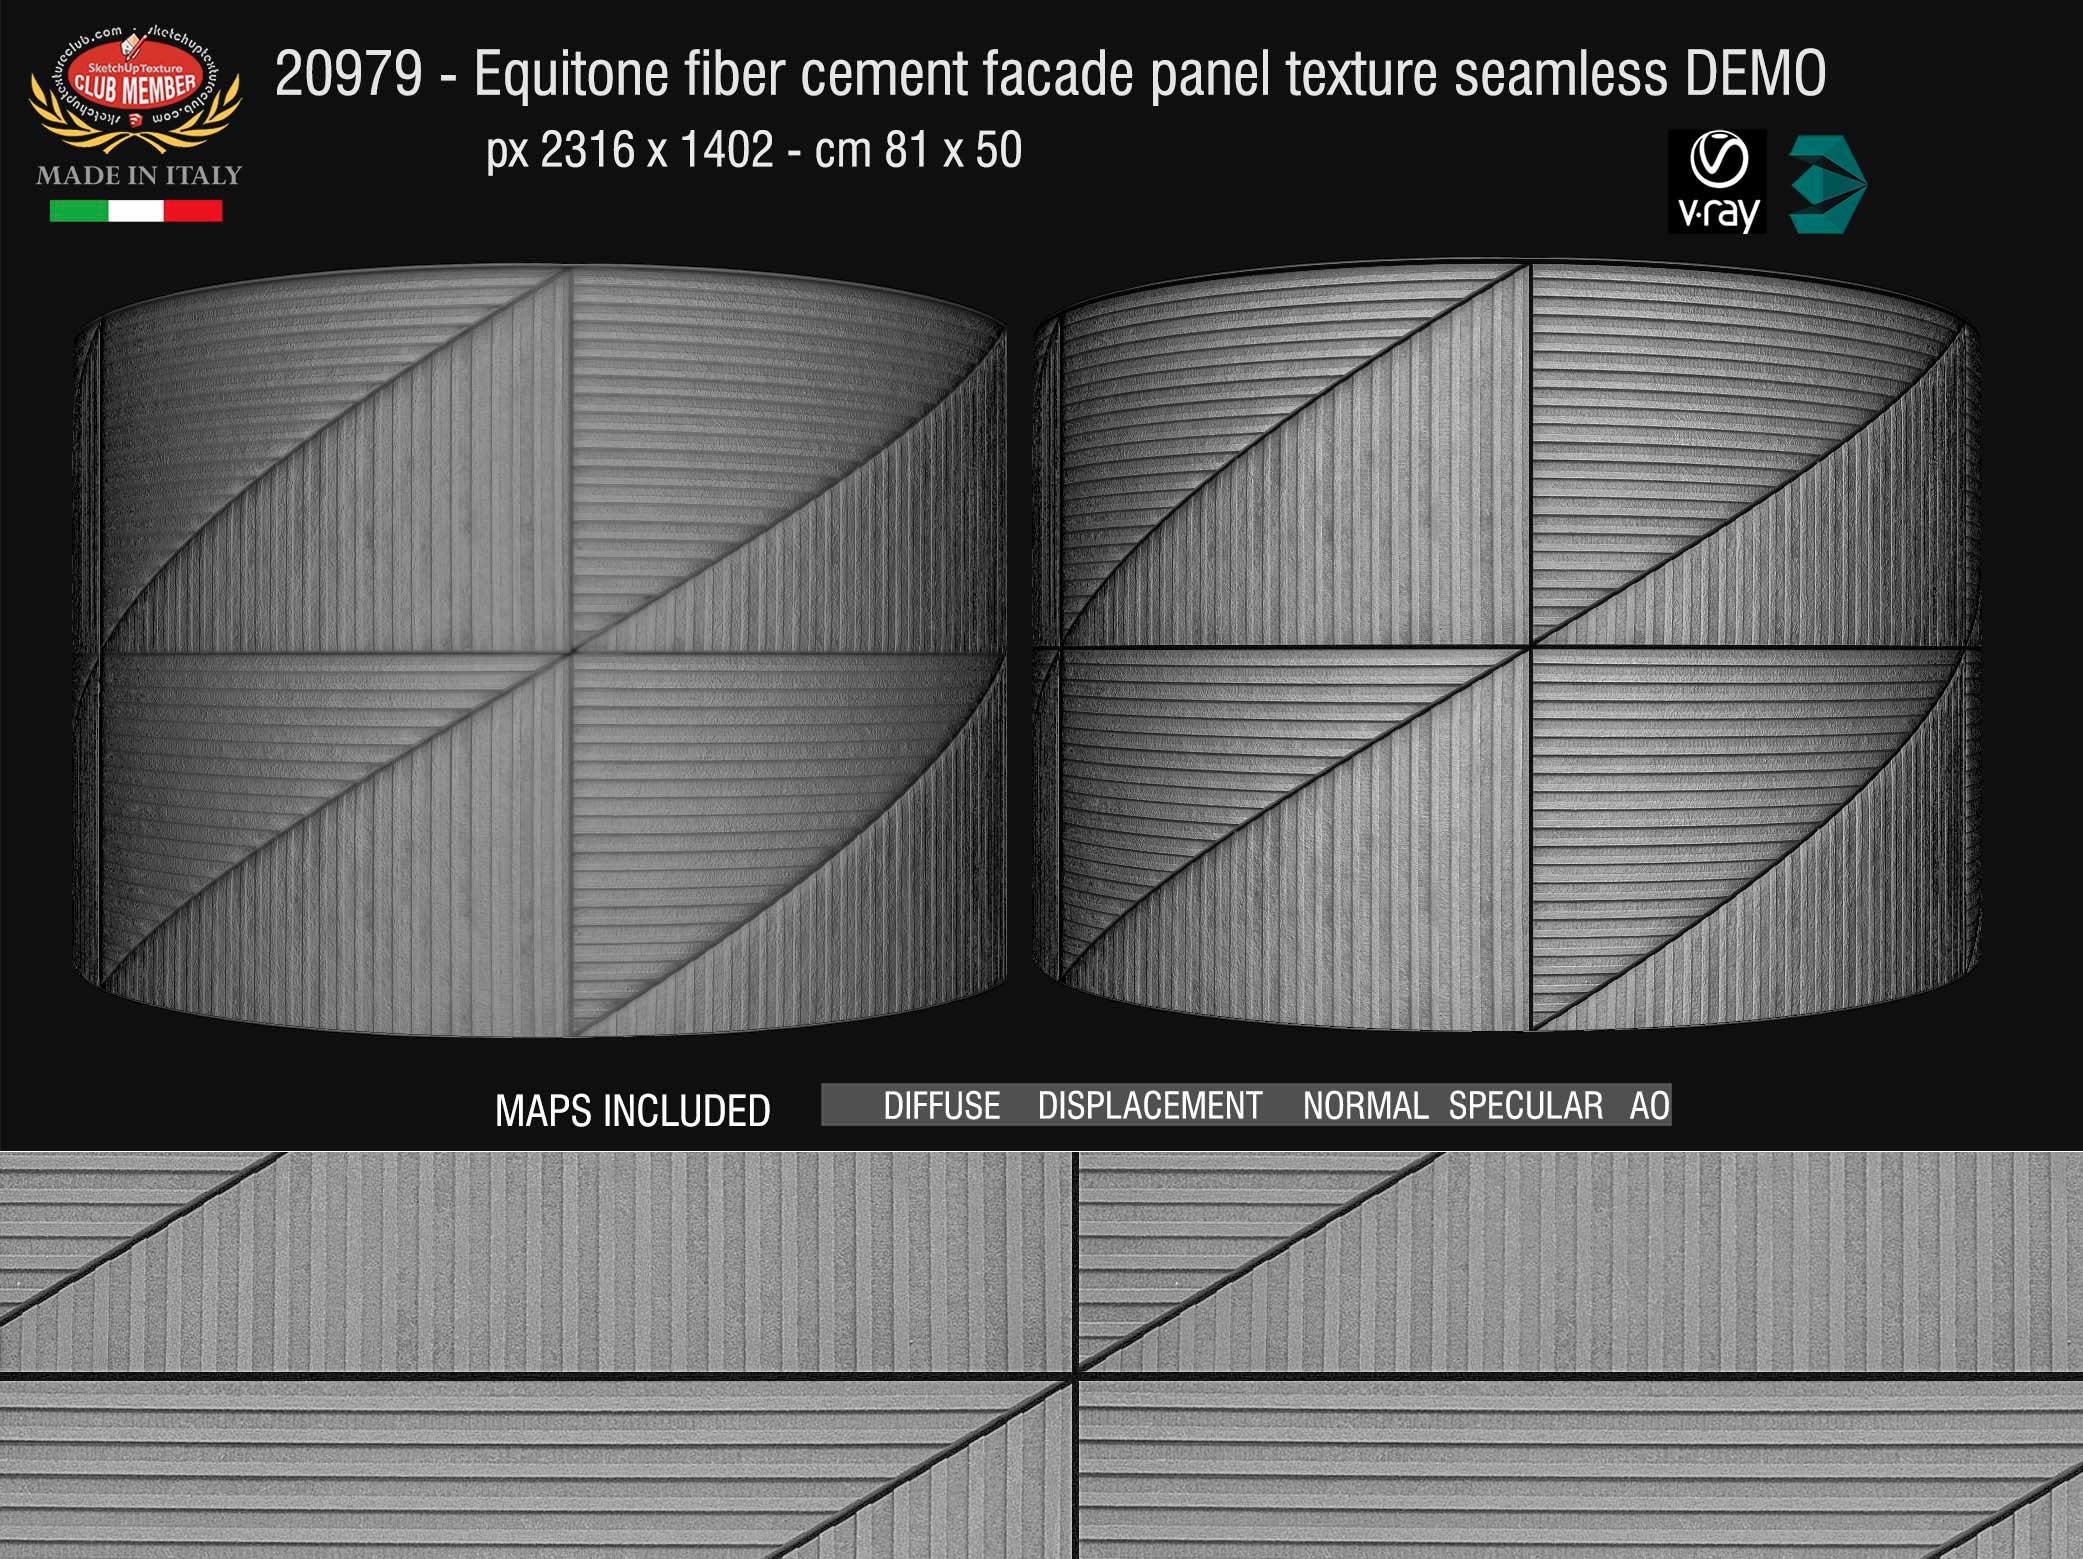 CLICK TO ENLARGE Equitone fiber cement facade panel texture + maps DEMO